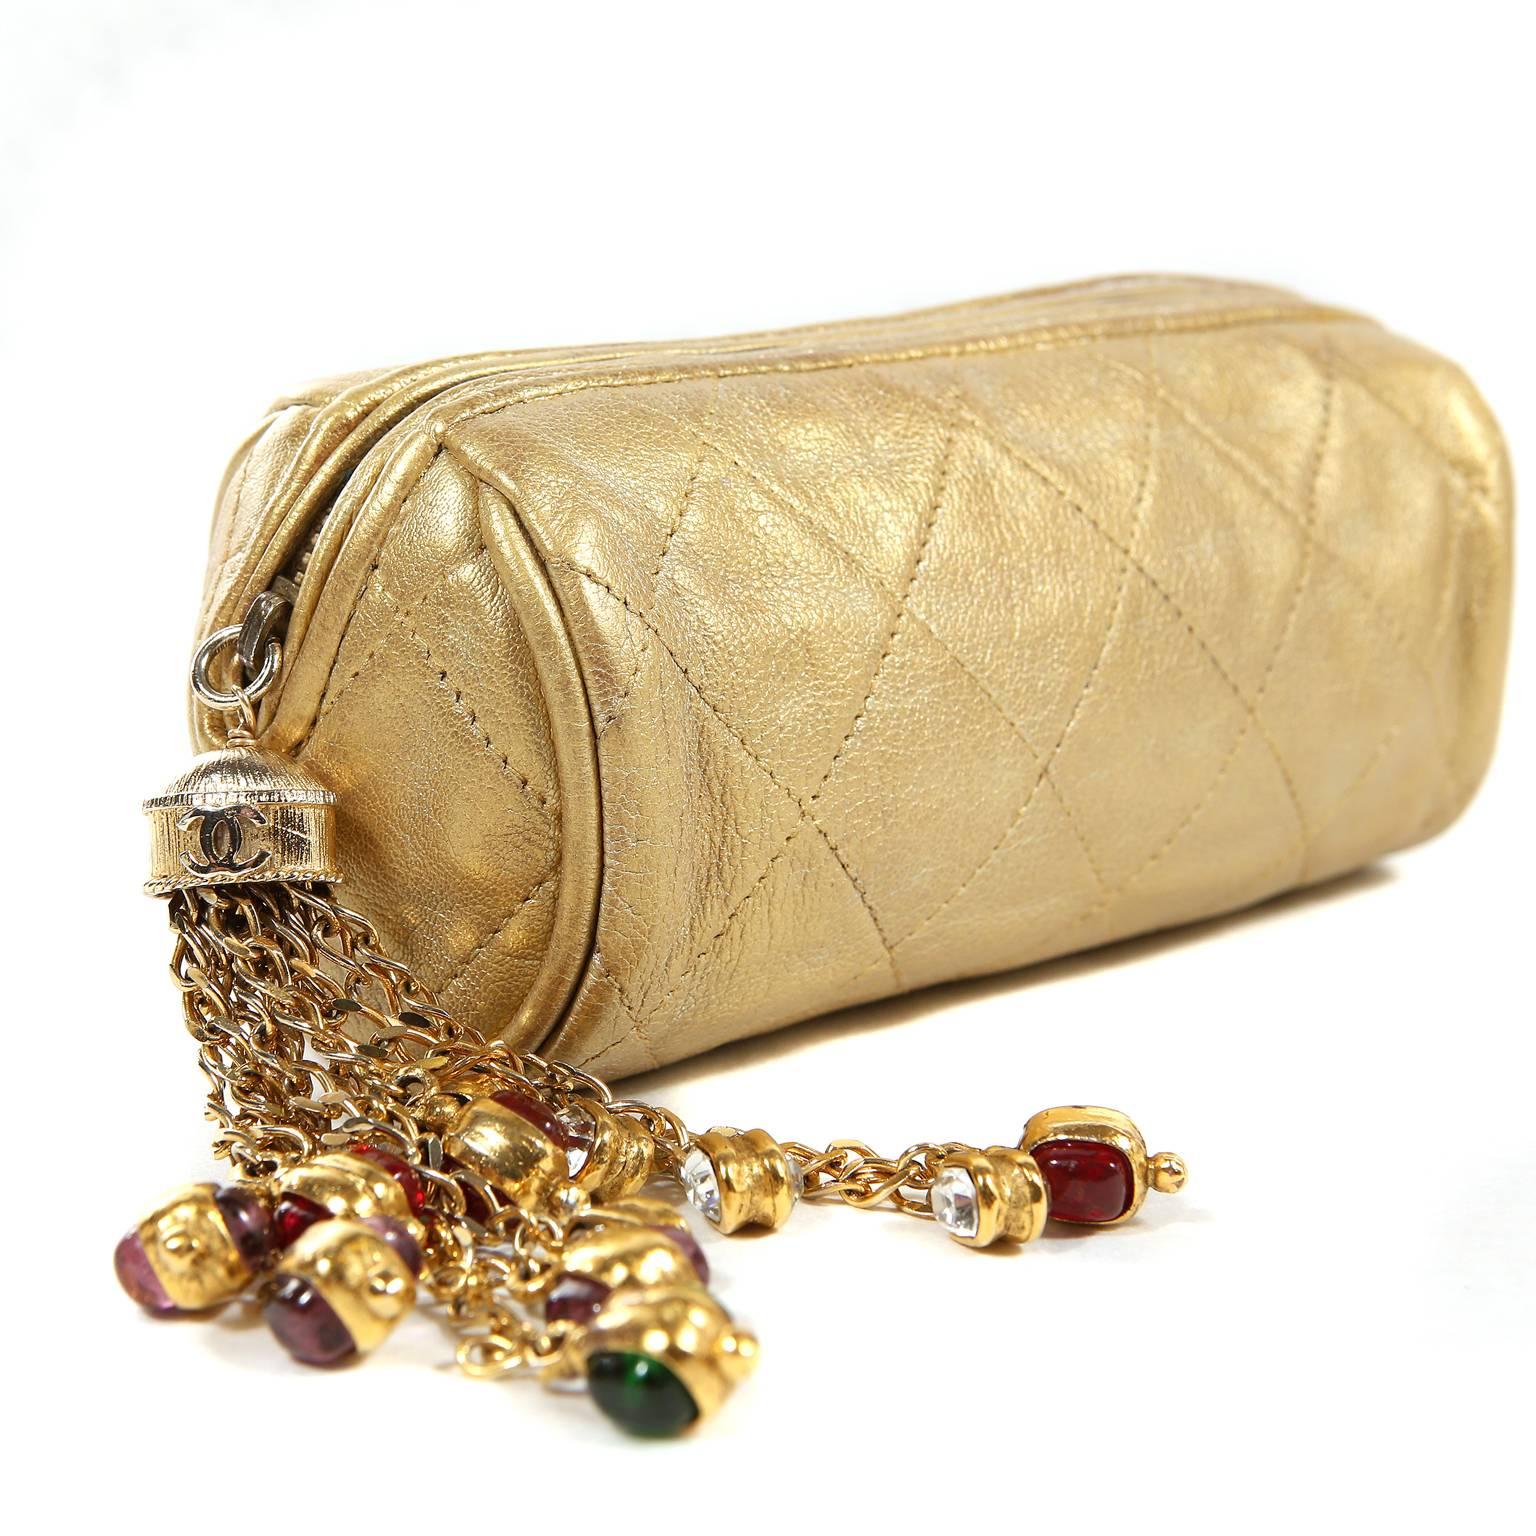 Chanel Gold Gripoix Tassel Evening Bag is in mint condition.  An early vintage piece, the Gripoix jeweled tassel makes this a rare and highly collectible Chanel. 
Soft metallic gold leather is quilted in signature Chanel diamond pattern.  Rounded